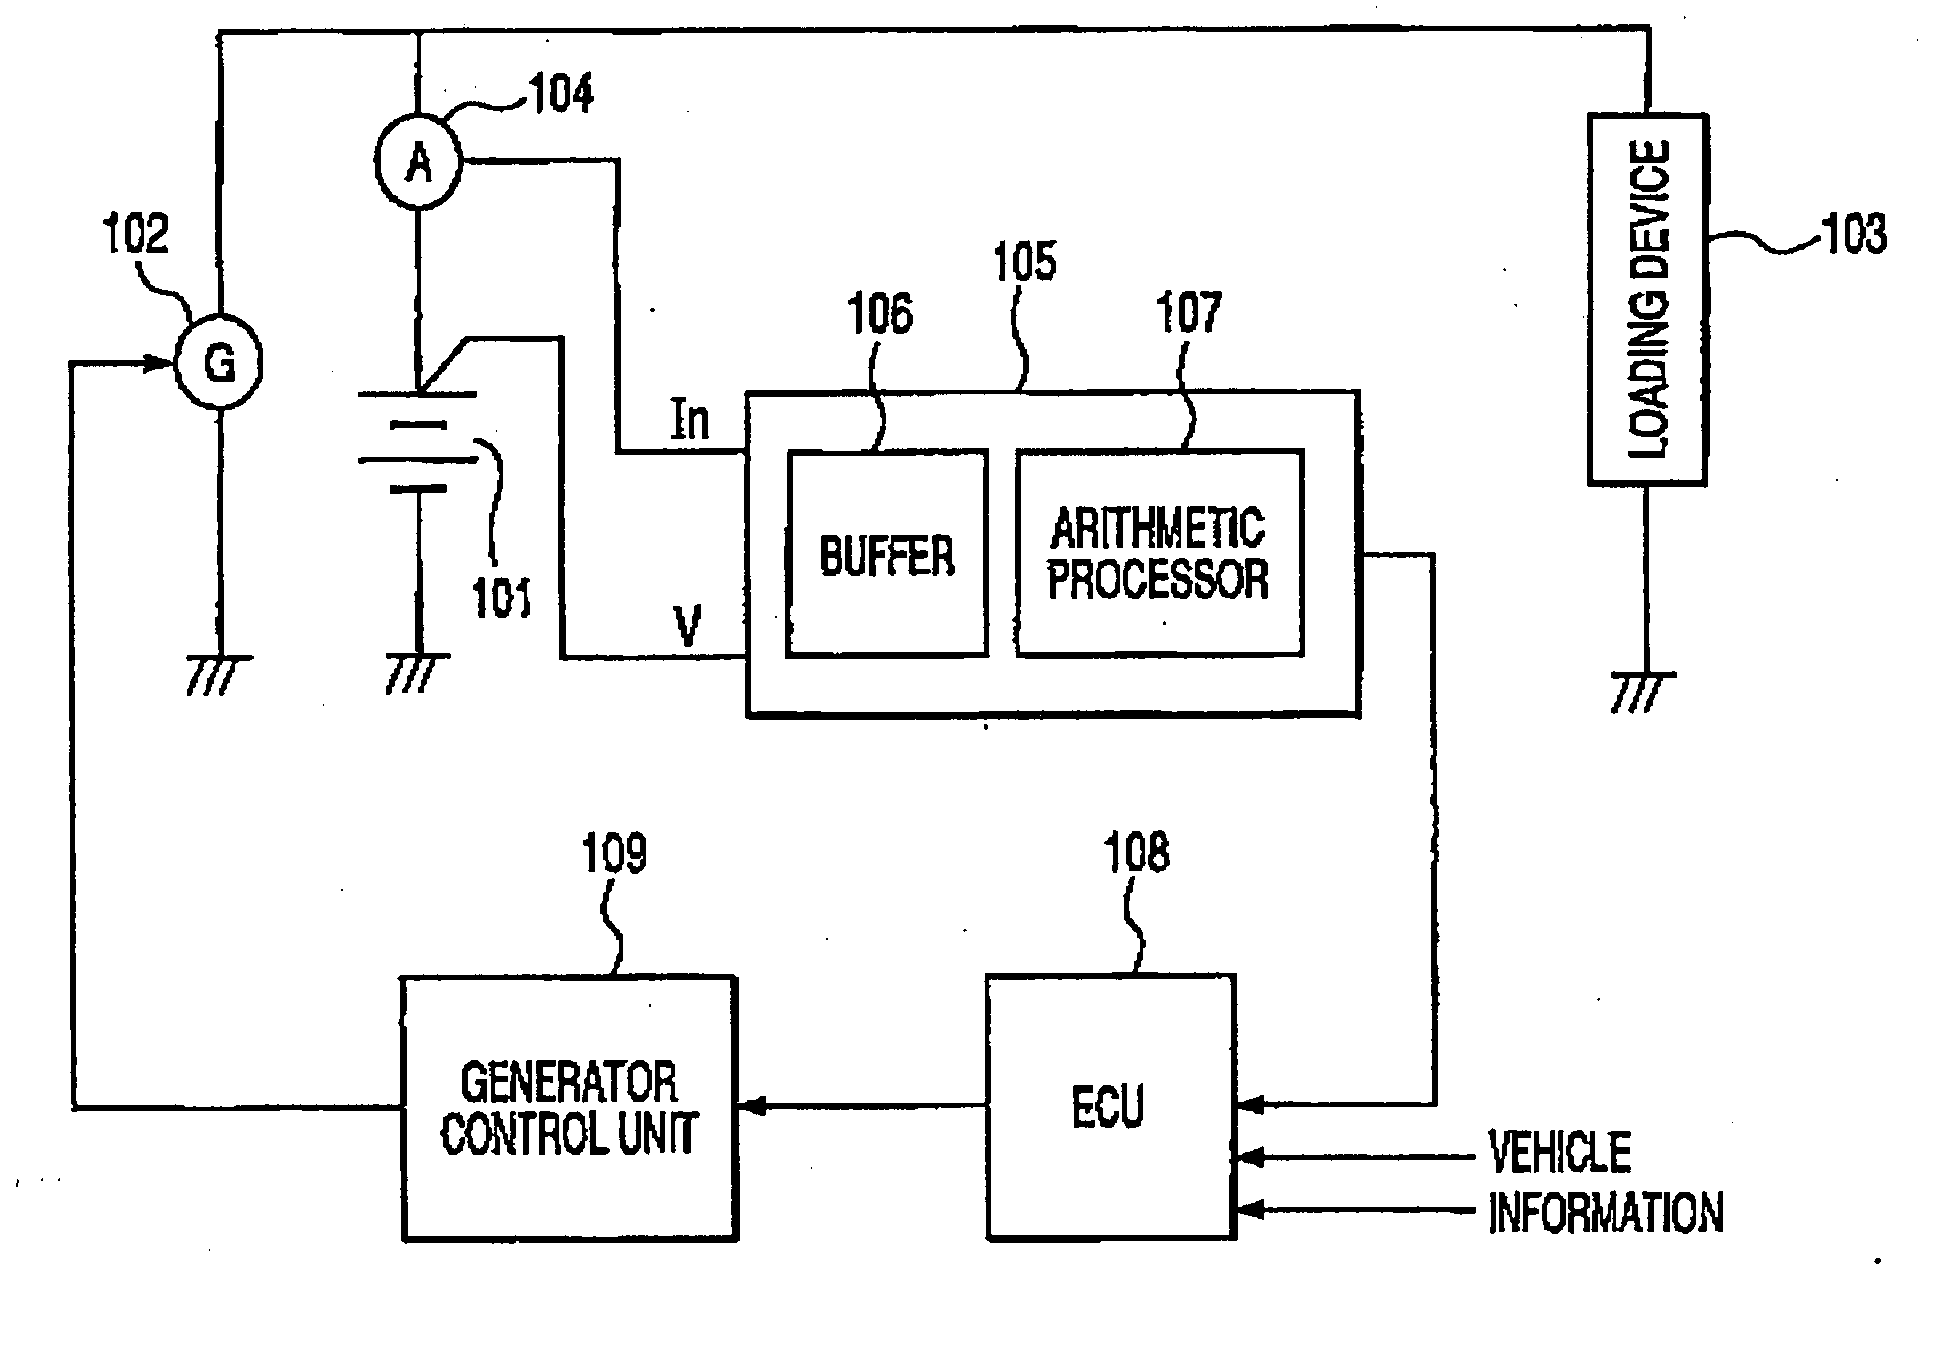 Apparatus for detecting charged state of secondary battery